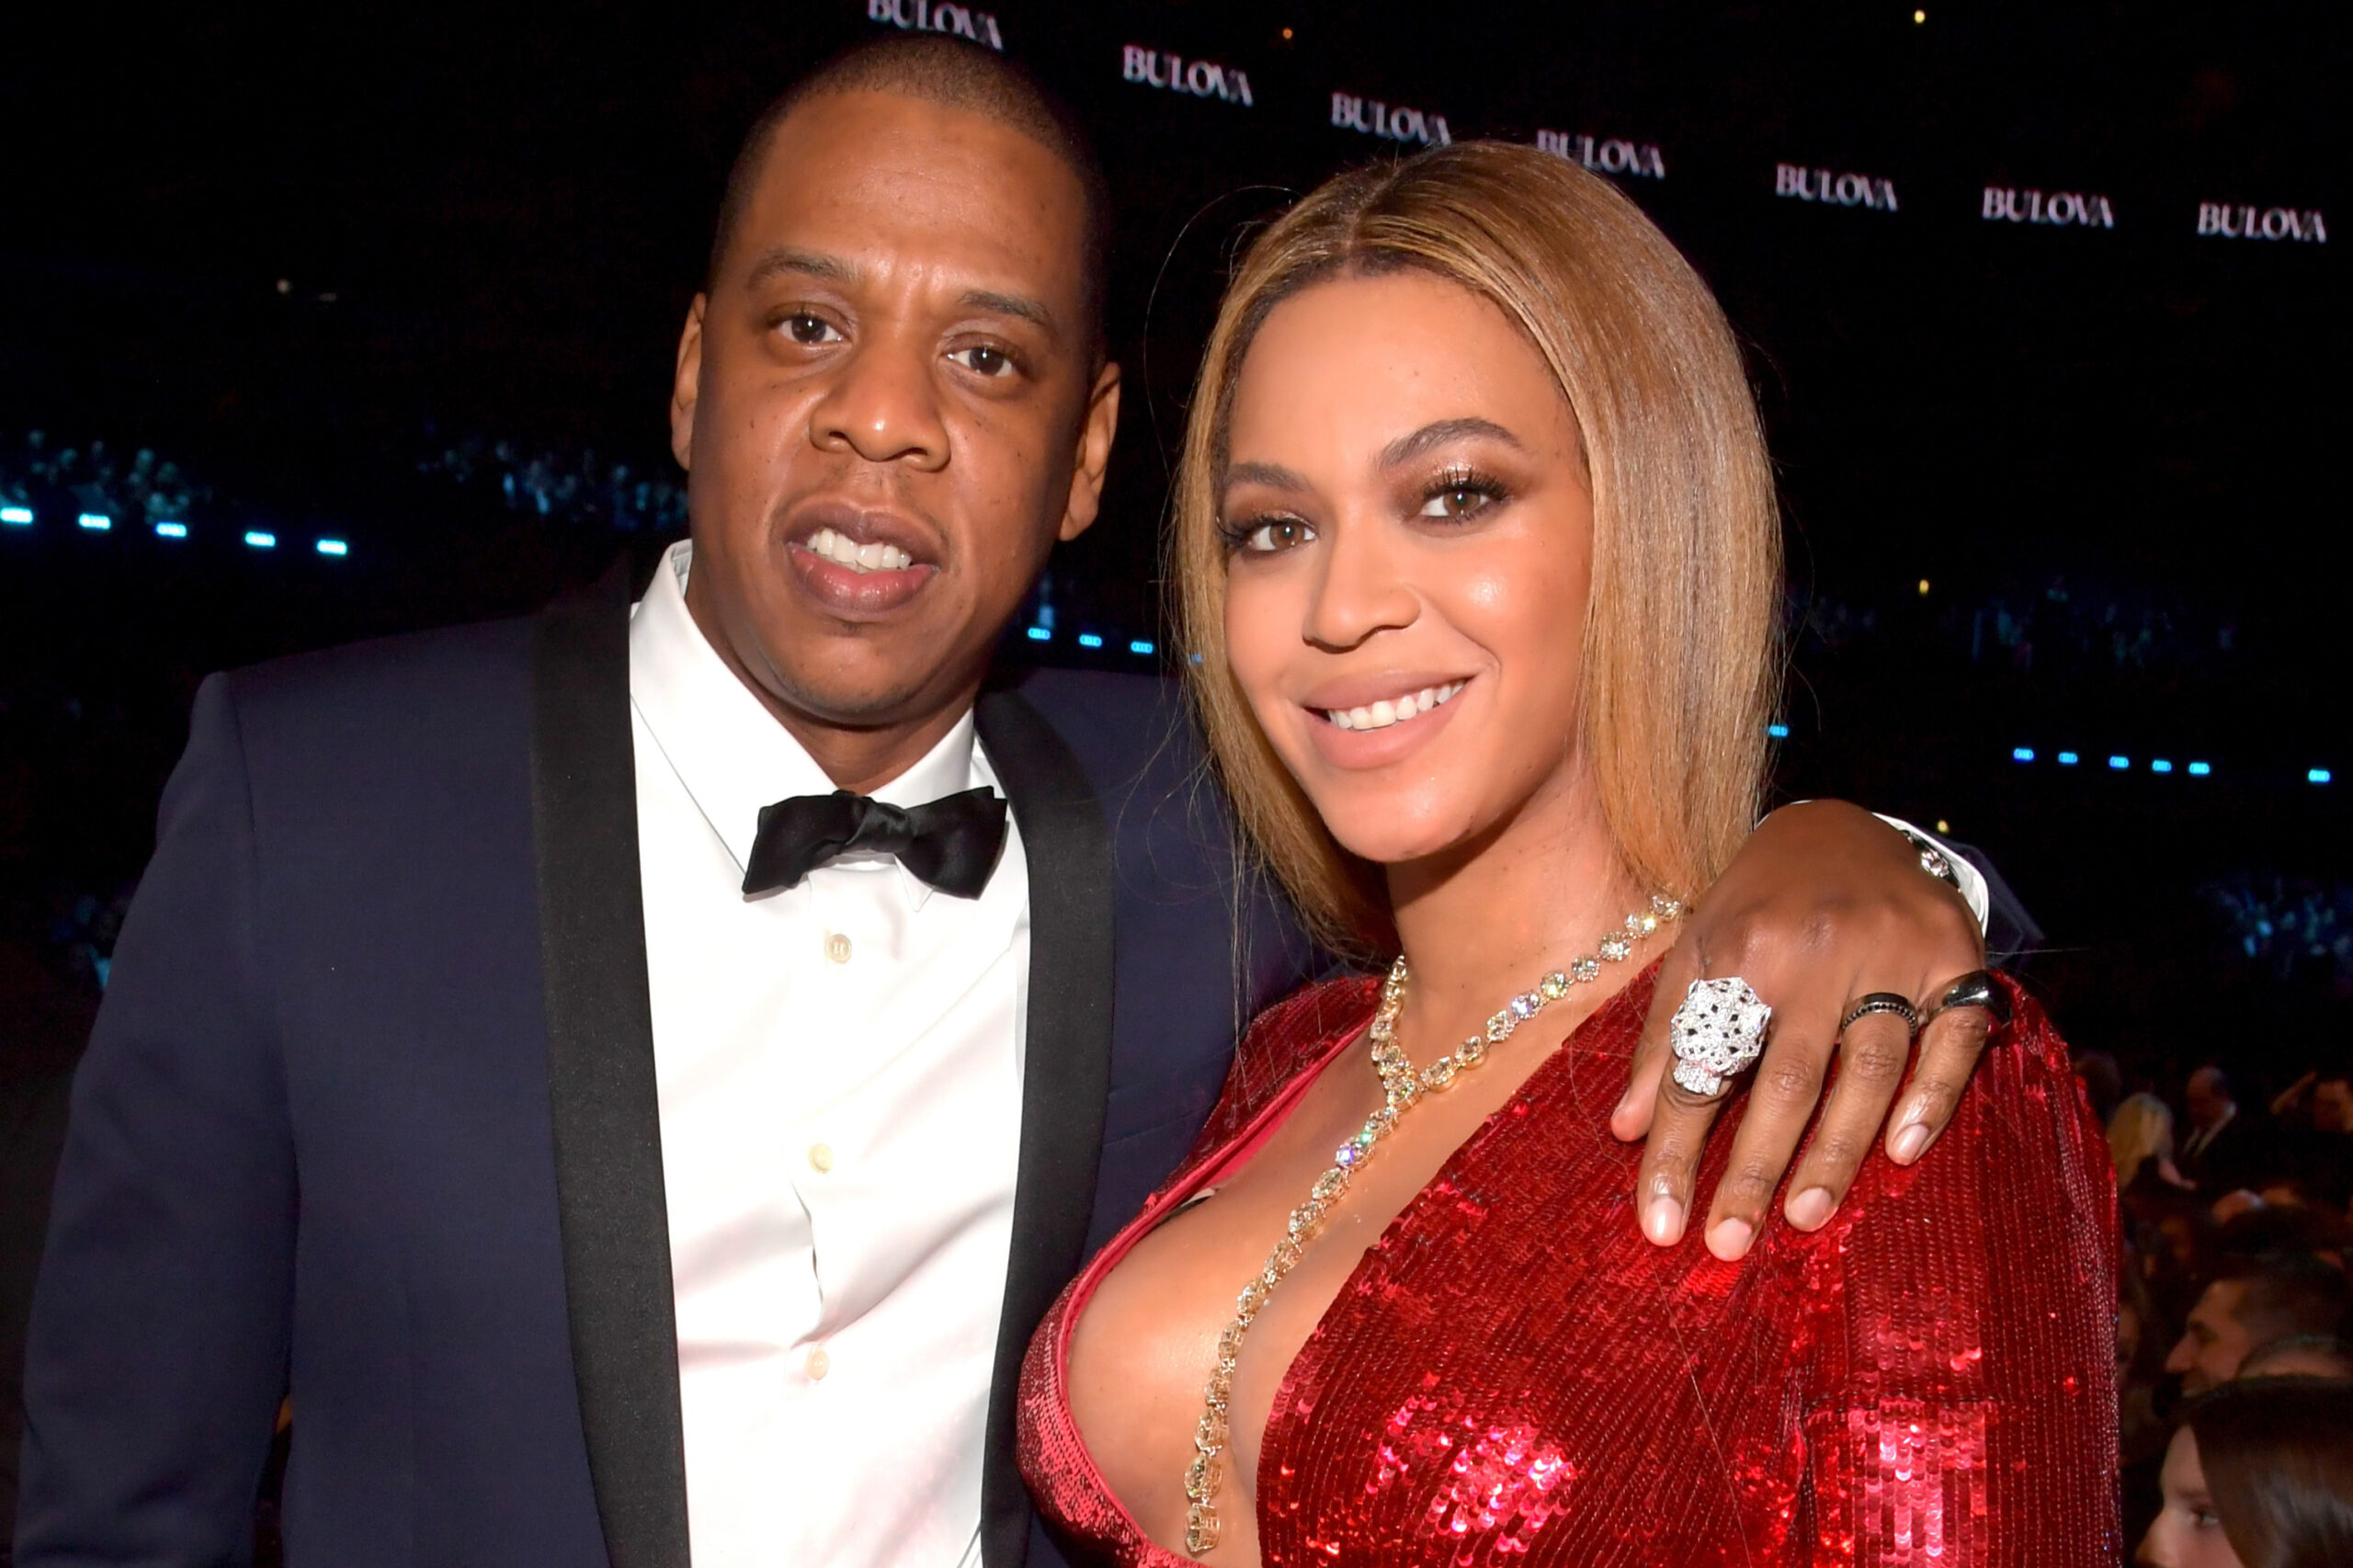 How much older is Jay-Z than Beyoncé?